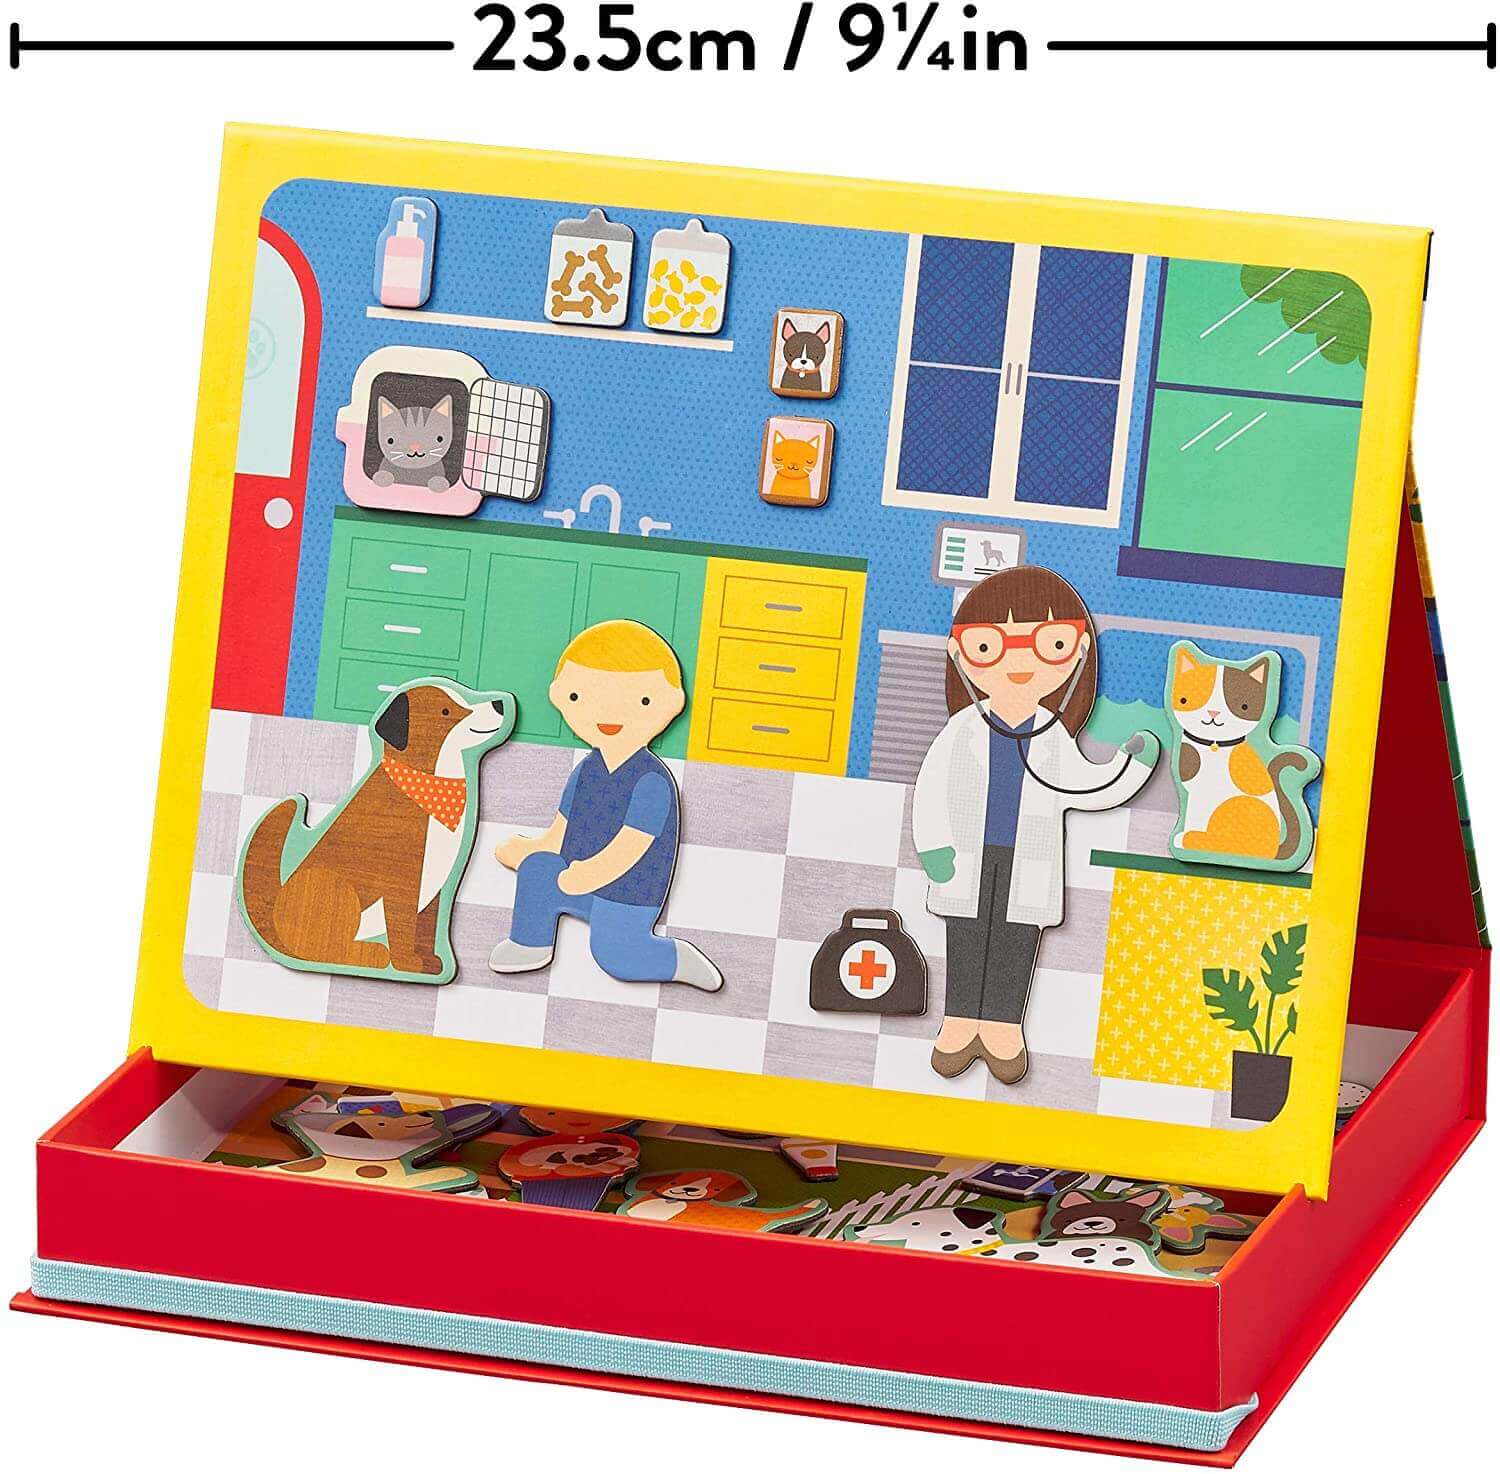 Pet Hospital Magnetic Play Scene, Petit Collage, eco-friendly Toys, Mountain Kids Toys